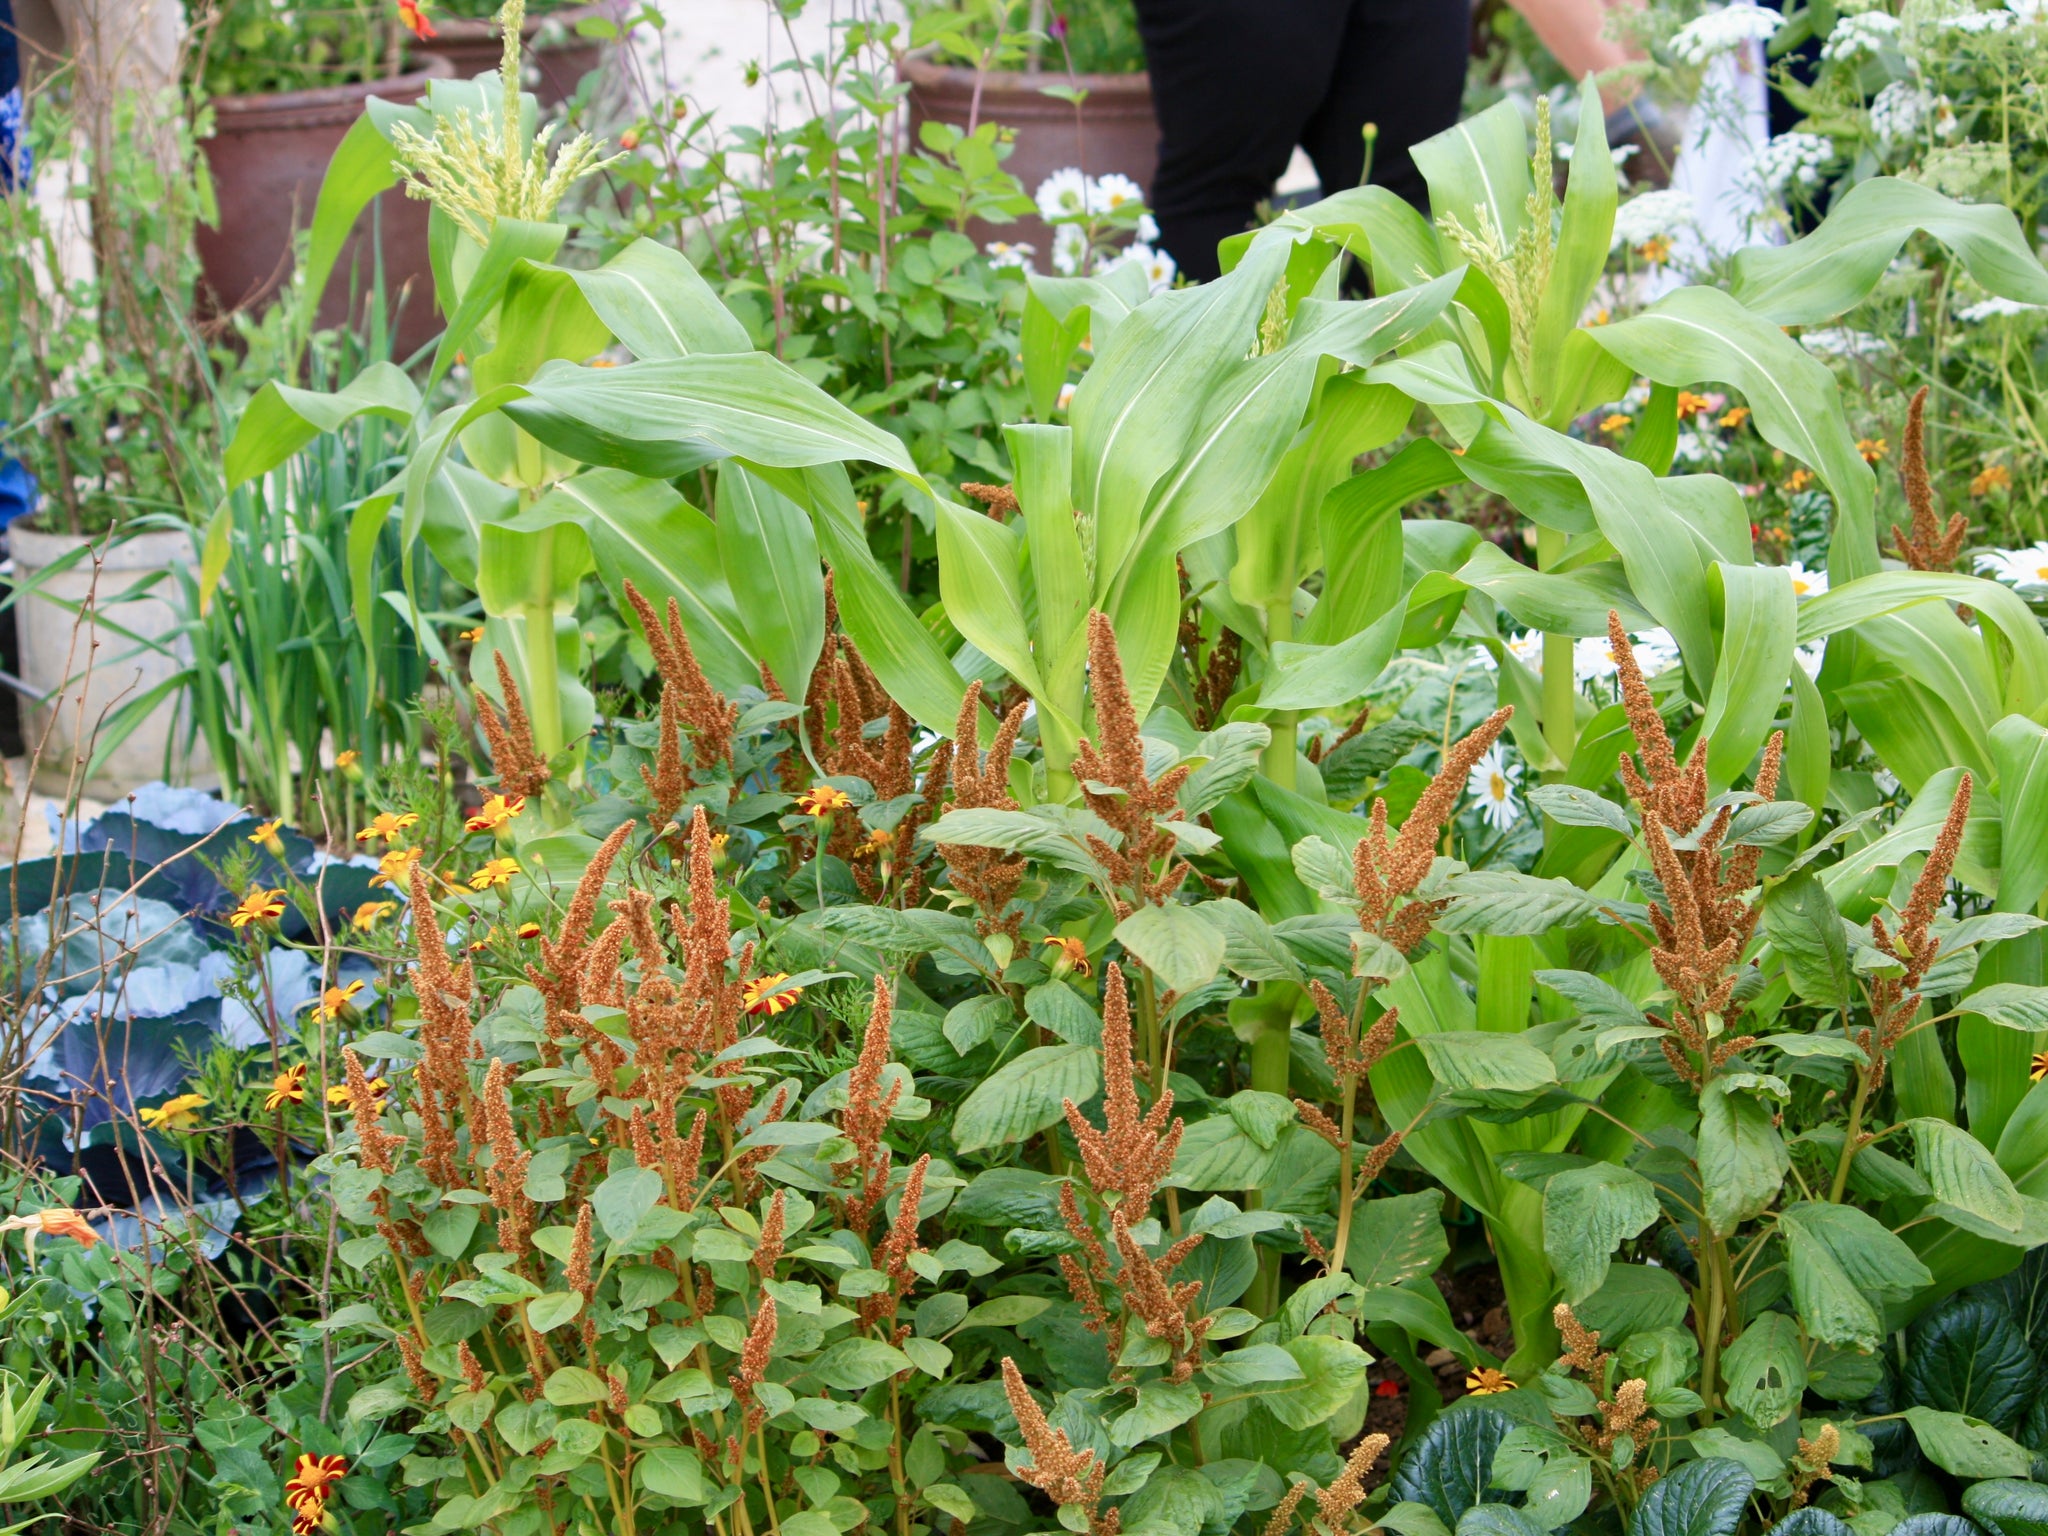 Amaranthus and sweetcorn grown as ornamental plants